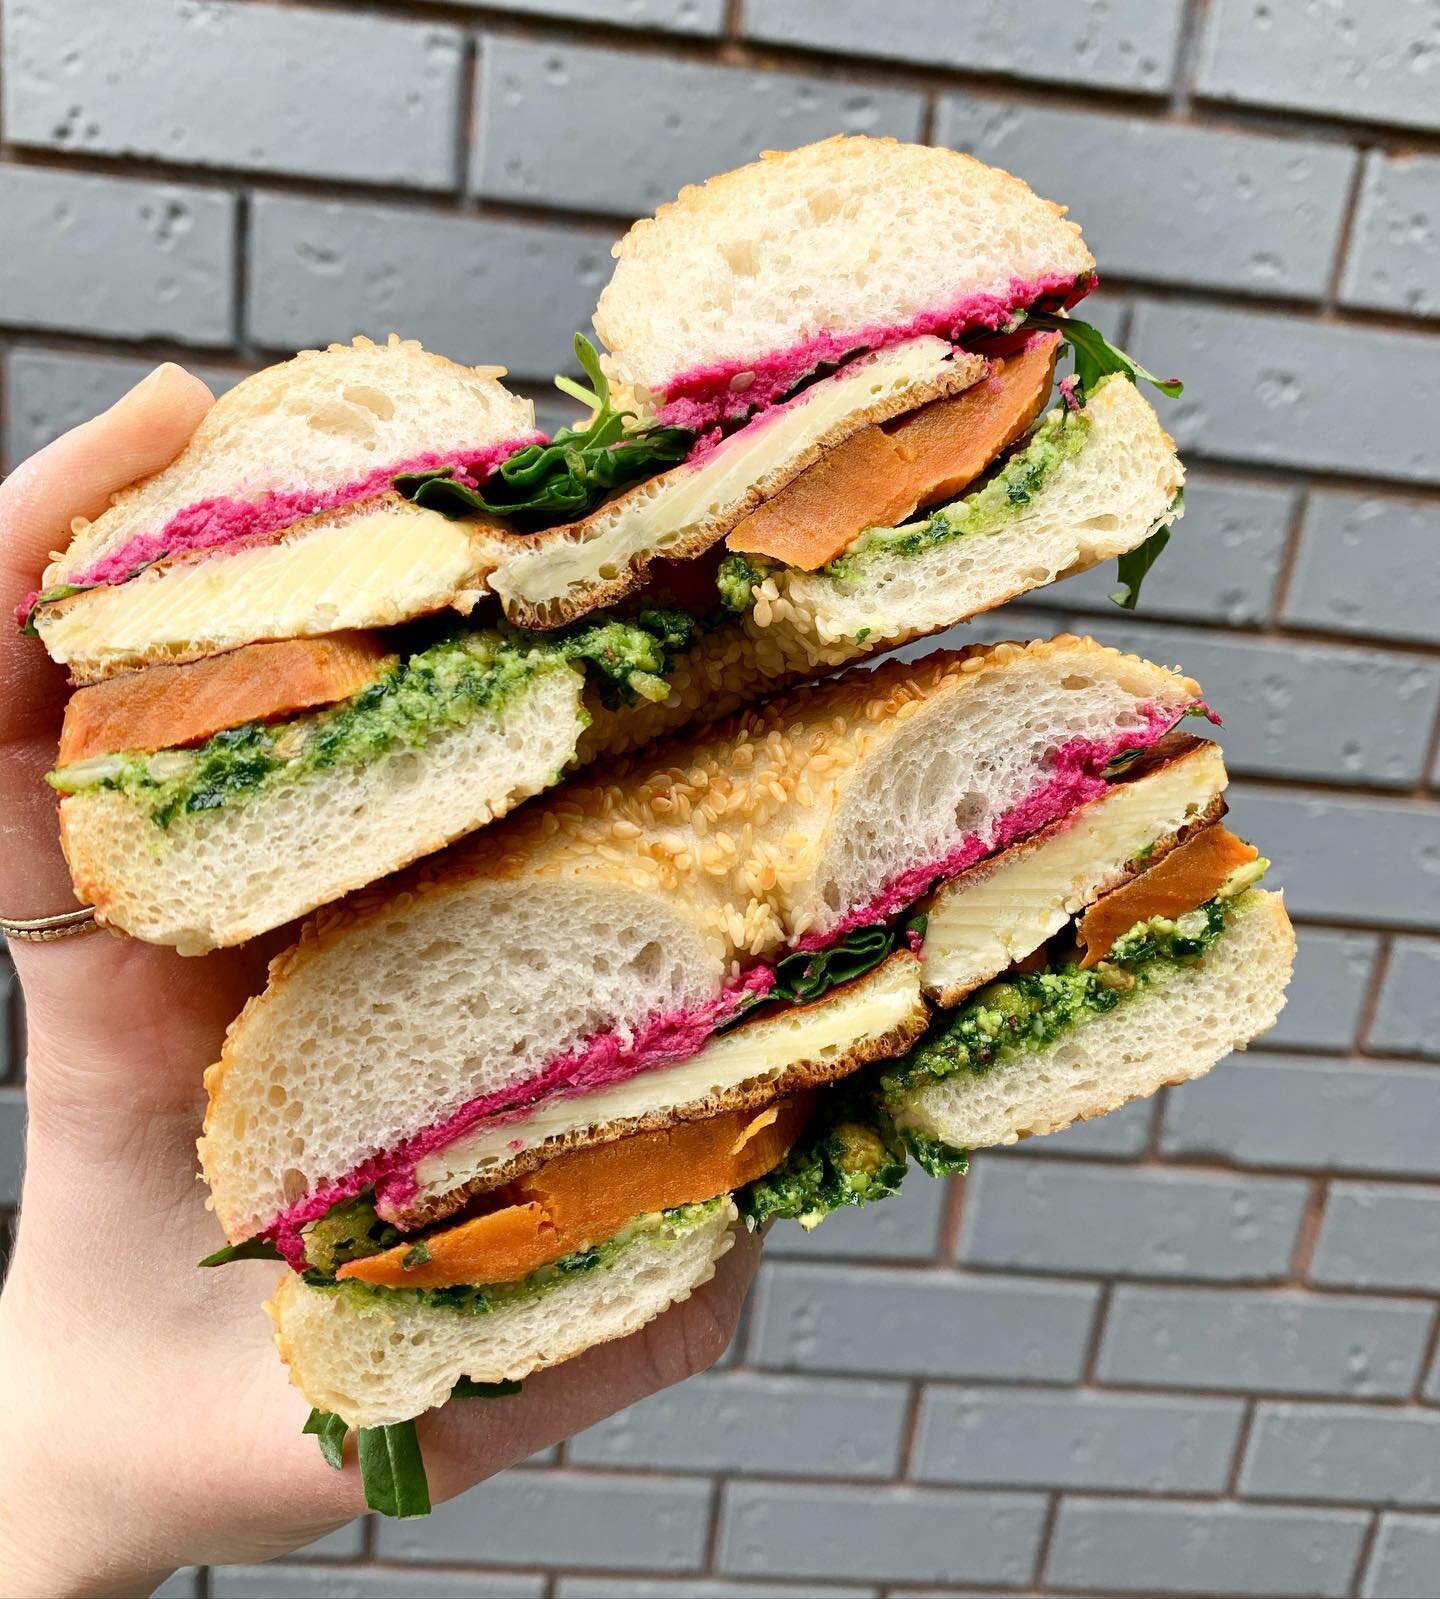 Happy Monday bagel lovers!! Our Halloumi bagel is by far our most popular, selling out nearly everyday! 
Filled with house made kale pesto, roast sweet potato, halloumi, rocket &amp; beetroot hummus toasted in a fresh @noisettebakery bagel 😋🥯 #hall